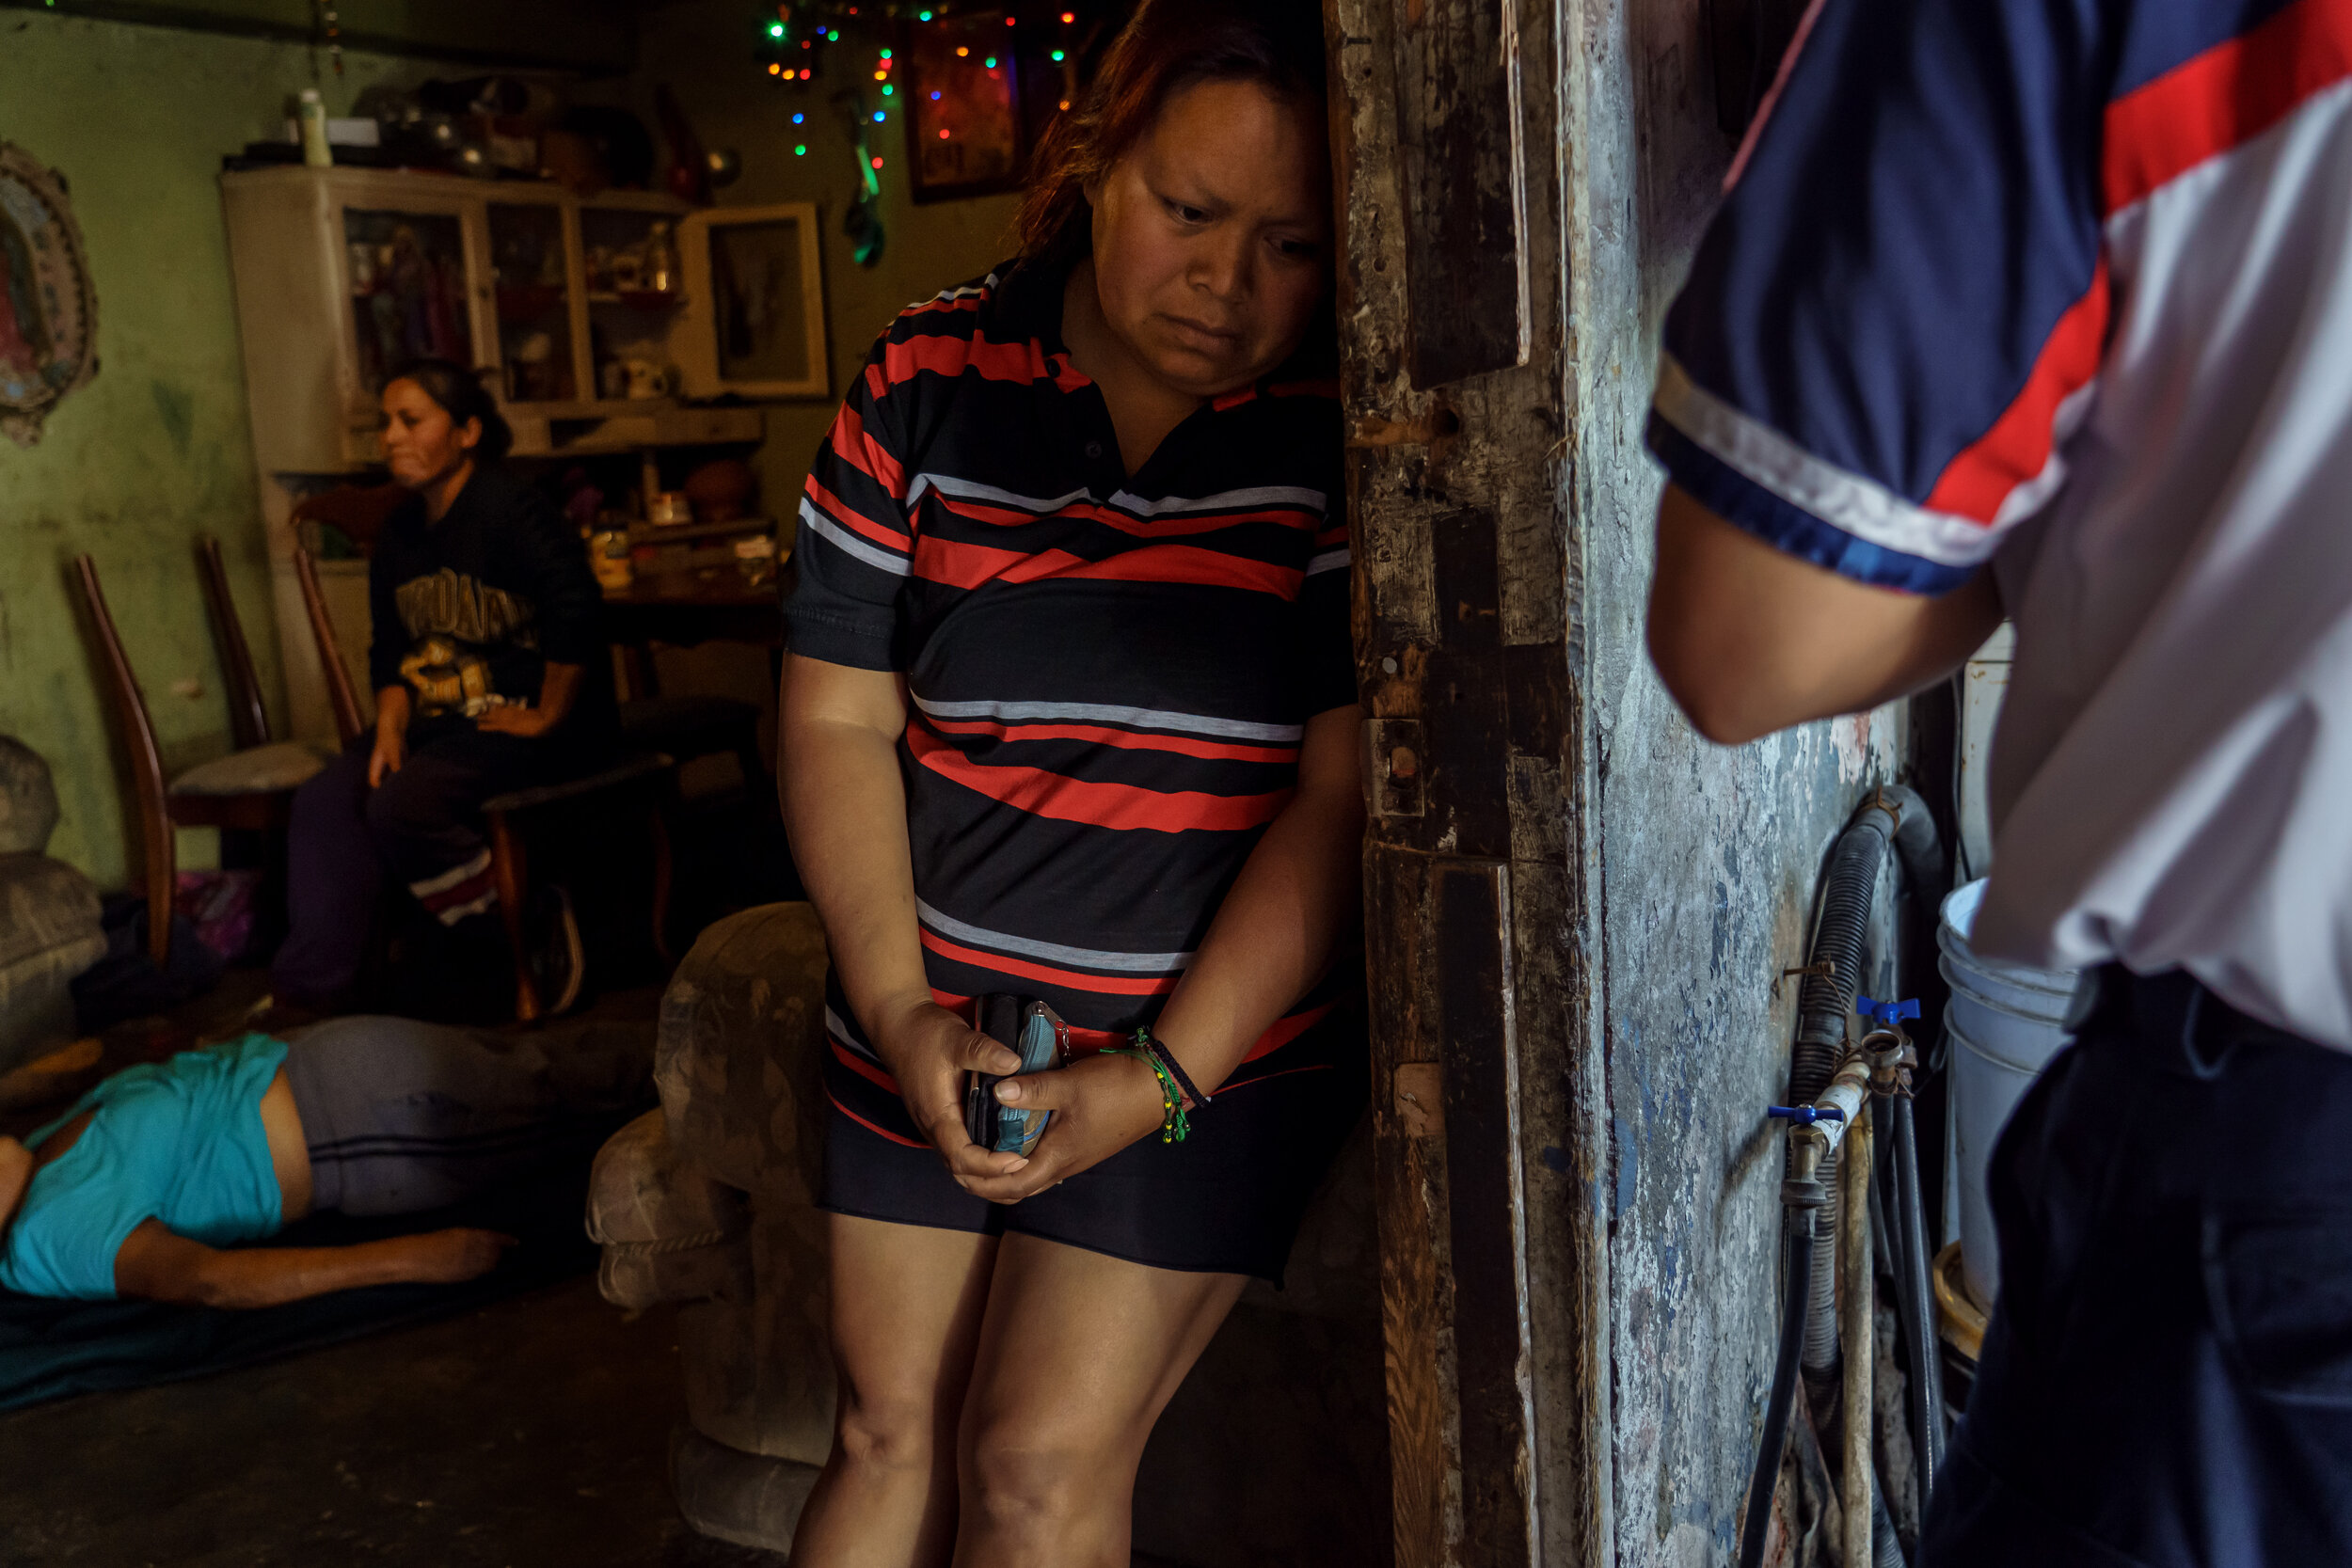  As Sergio Garcia stands in the doorway to calmly explain the next steps after death, Georgina Barajas Rios, grieves for her mother who just passed away, Maria Ruiz Olmedo, 71, after she suffered from symptoms that match COVID-19 symptoms, at their h